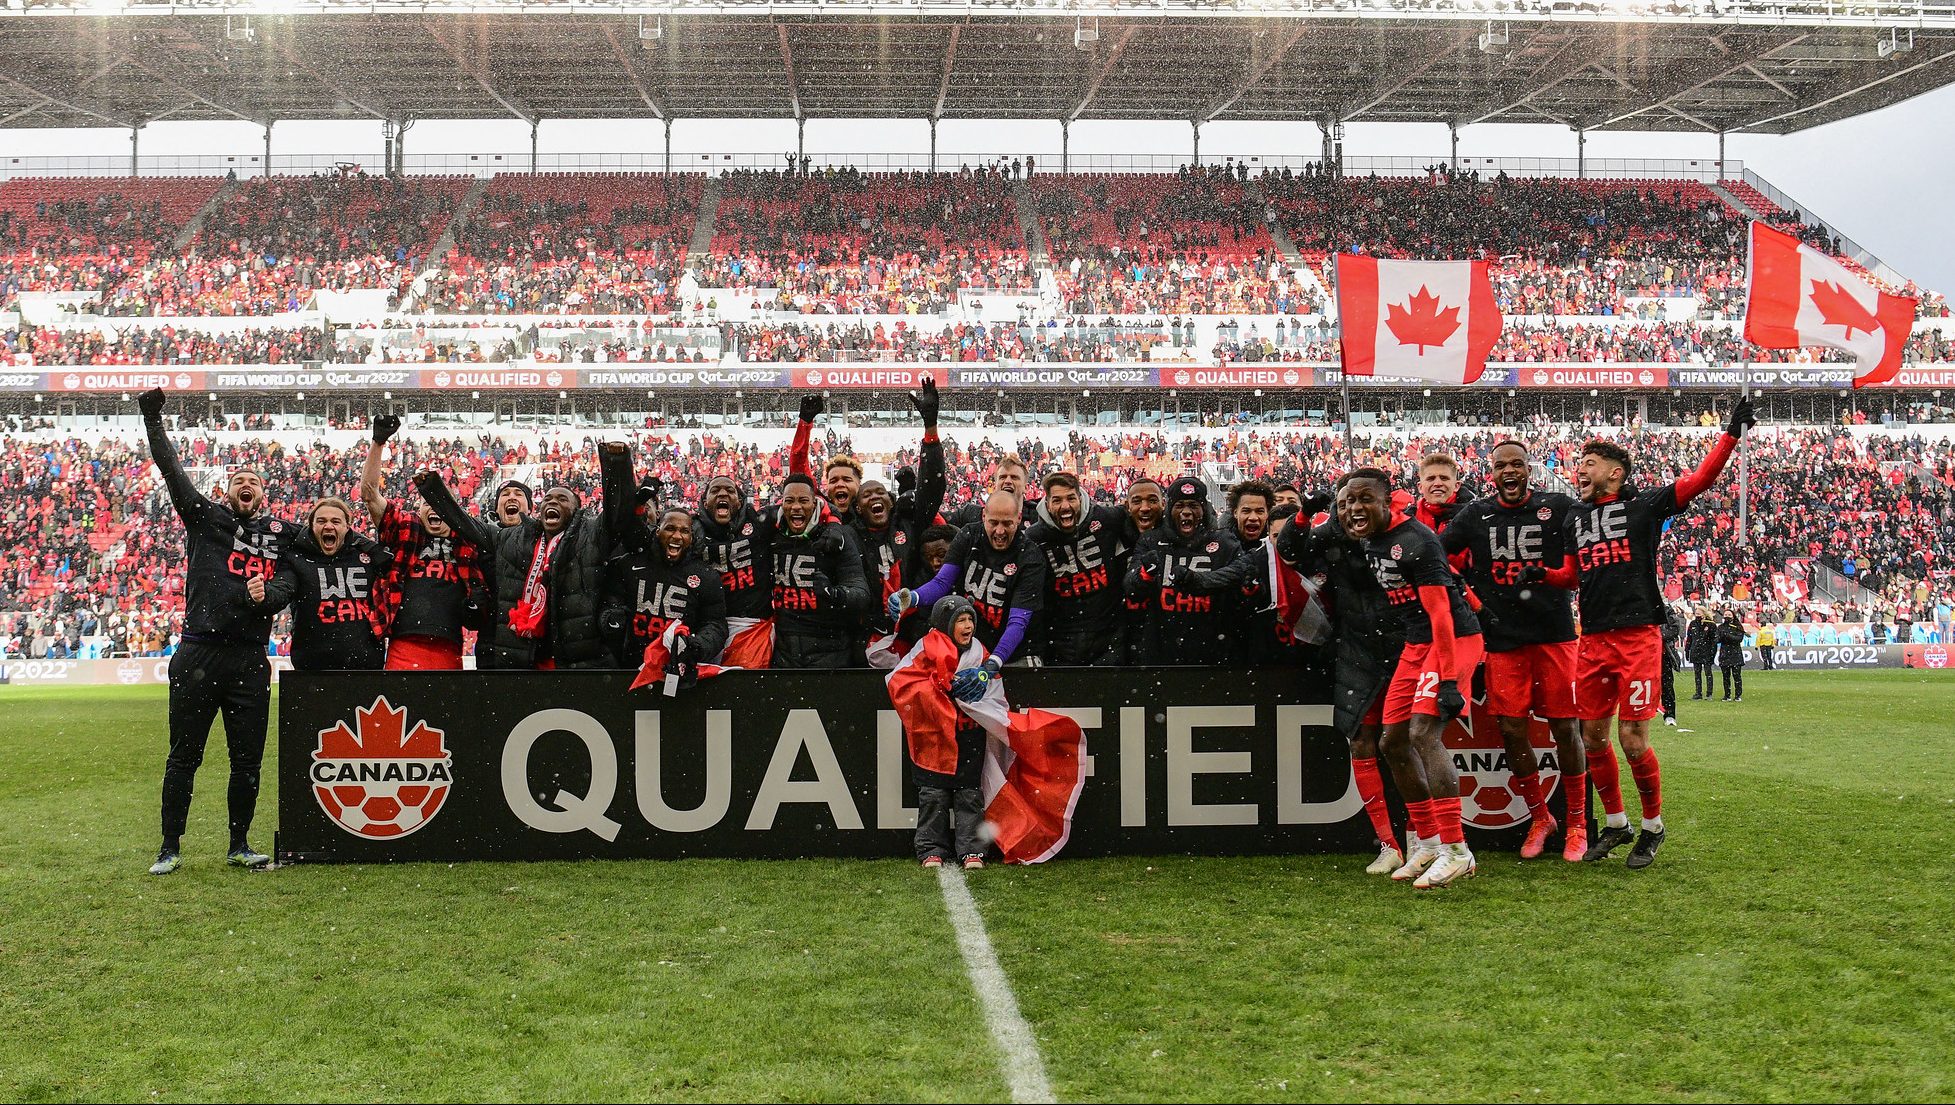 How Canada rewrote its soccer history with World Cup berth - Team Canada